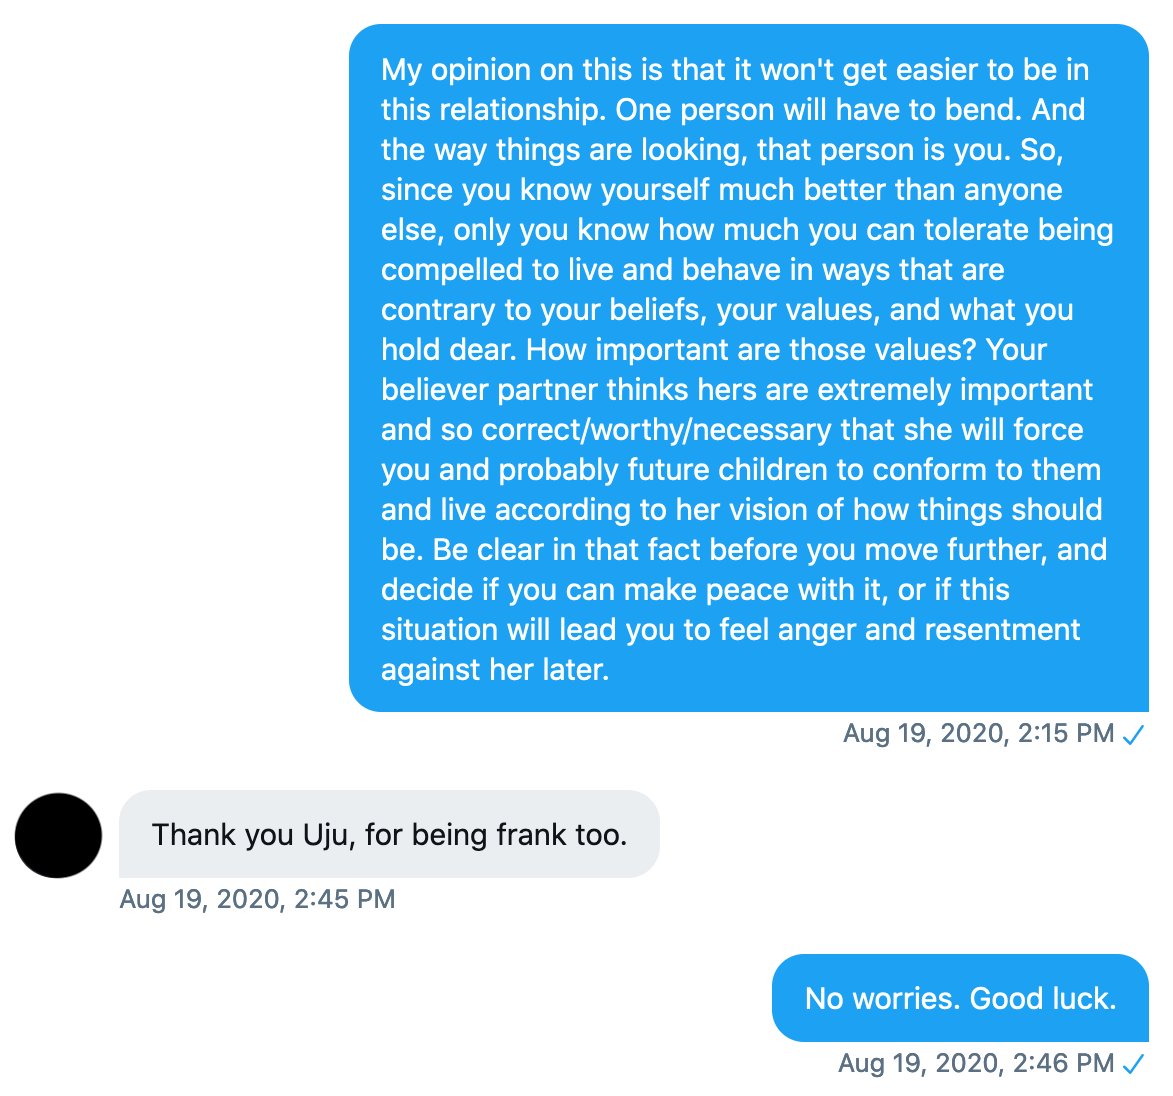 A while ago, a thoughtful and respectful man DM'd me to seek advice. An atheist who really loved his Christian girlfriend of 5 years and felt pressure to attend church and perform religiosity in public to keep the relationship. He just updated me about how it all turned out.